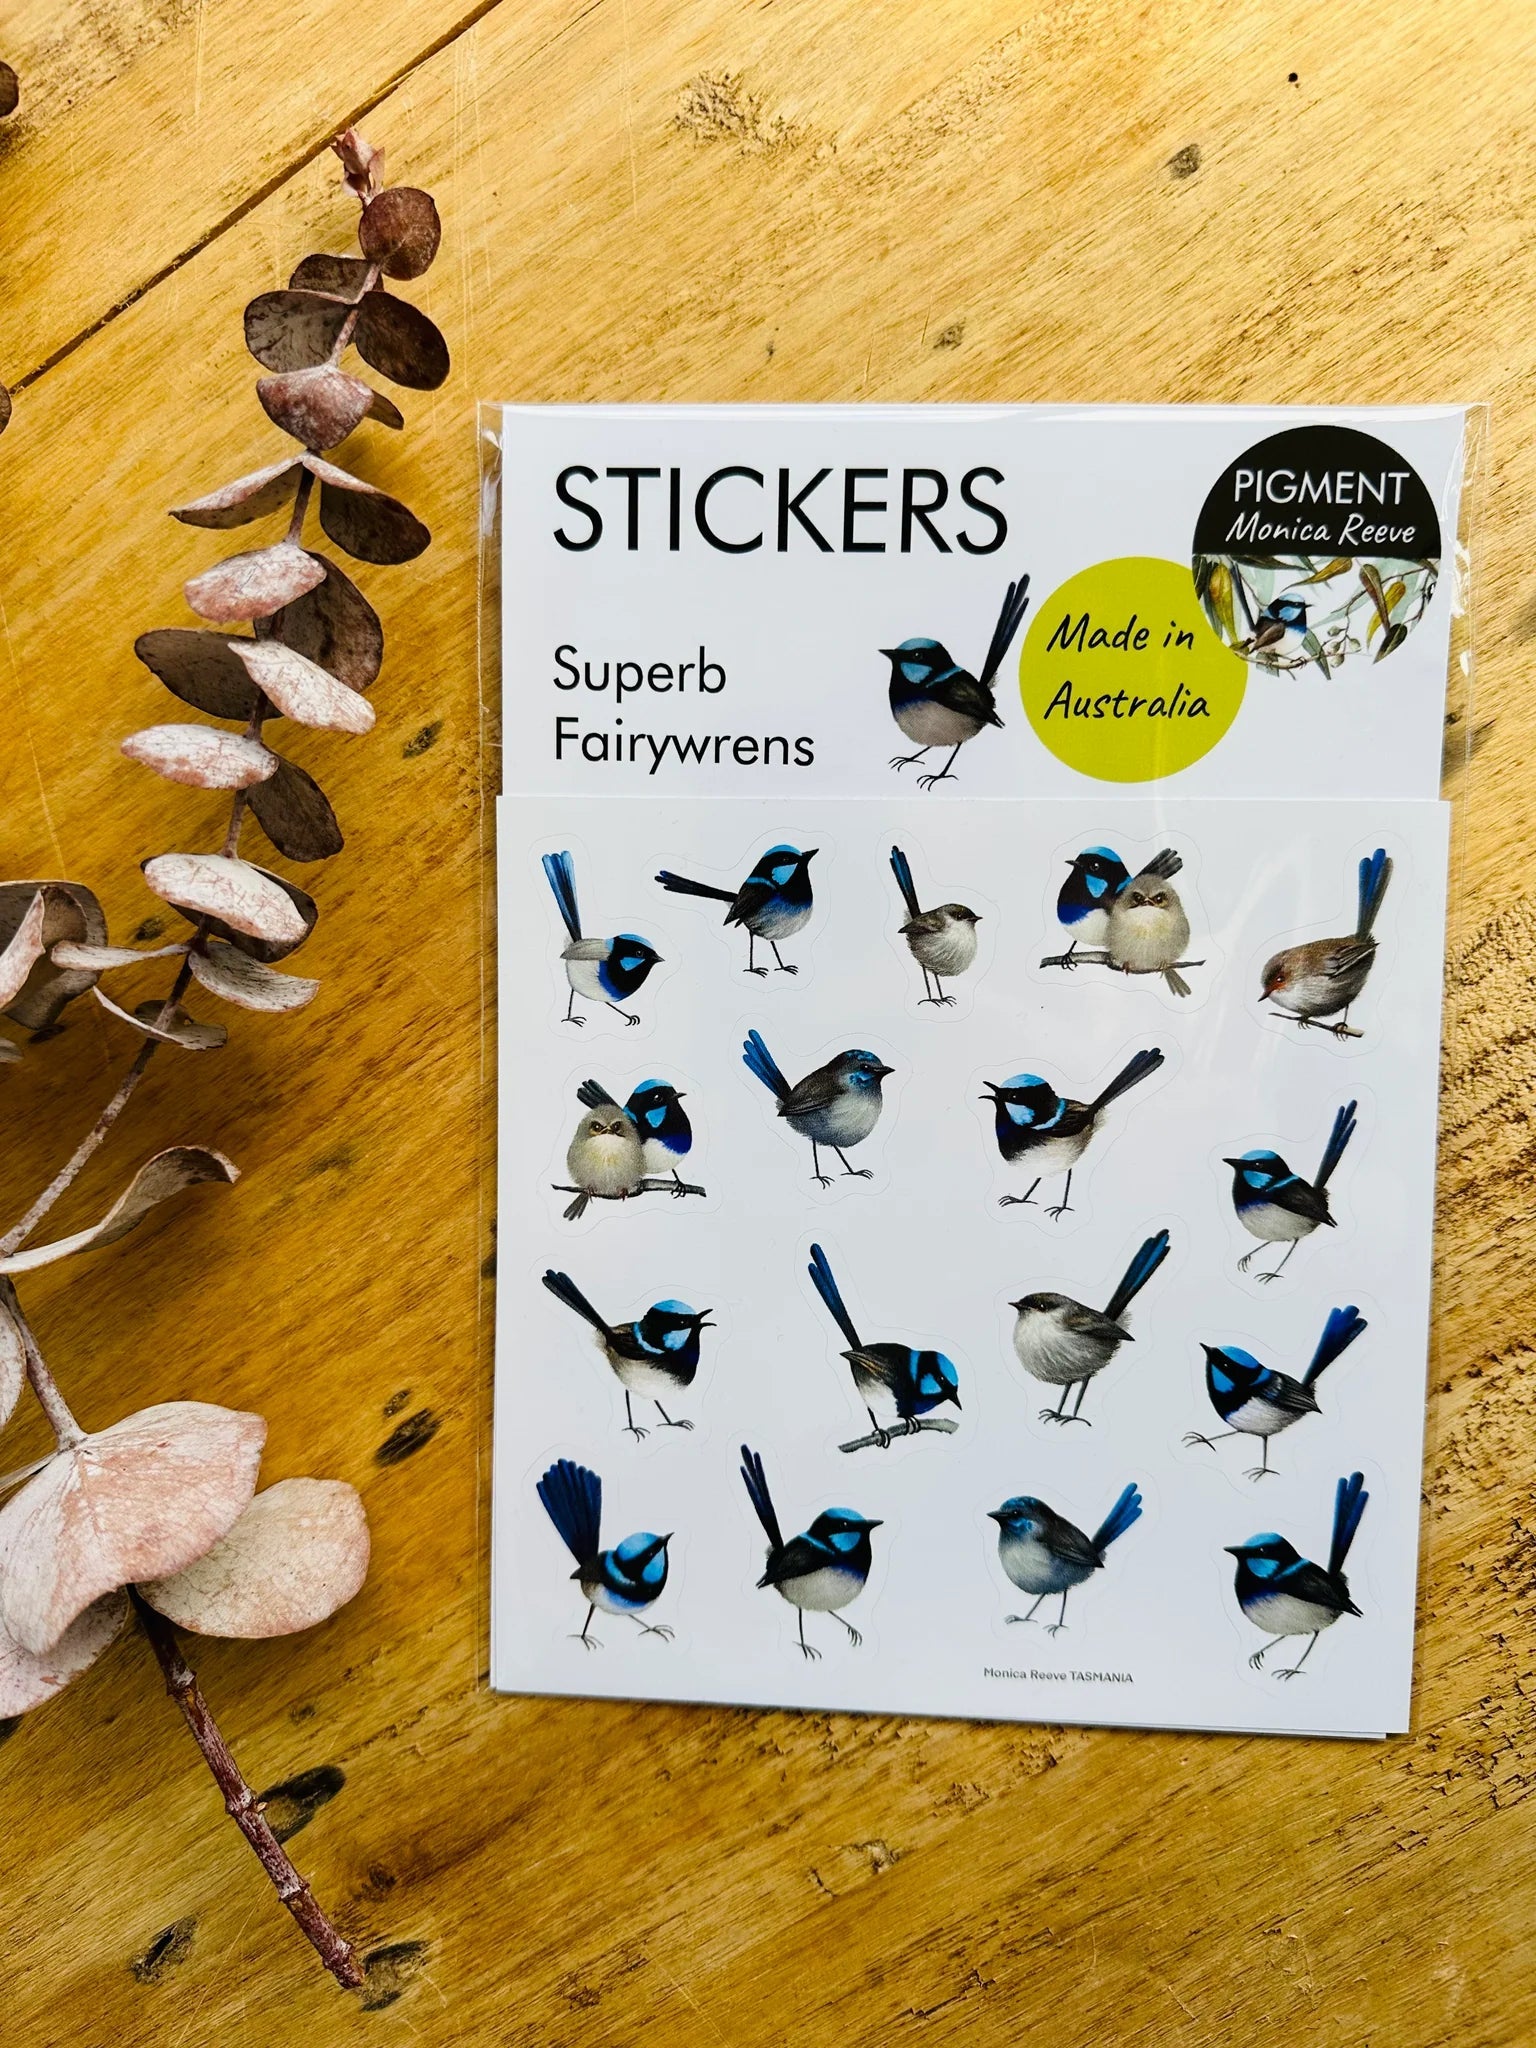 Stickers Sheets PIGMENT by Monica Reeve Decorative Stickers Monica Reeve Superb Fairywrens 